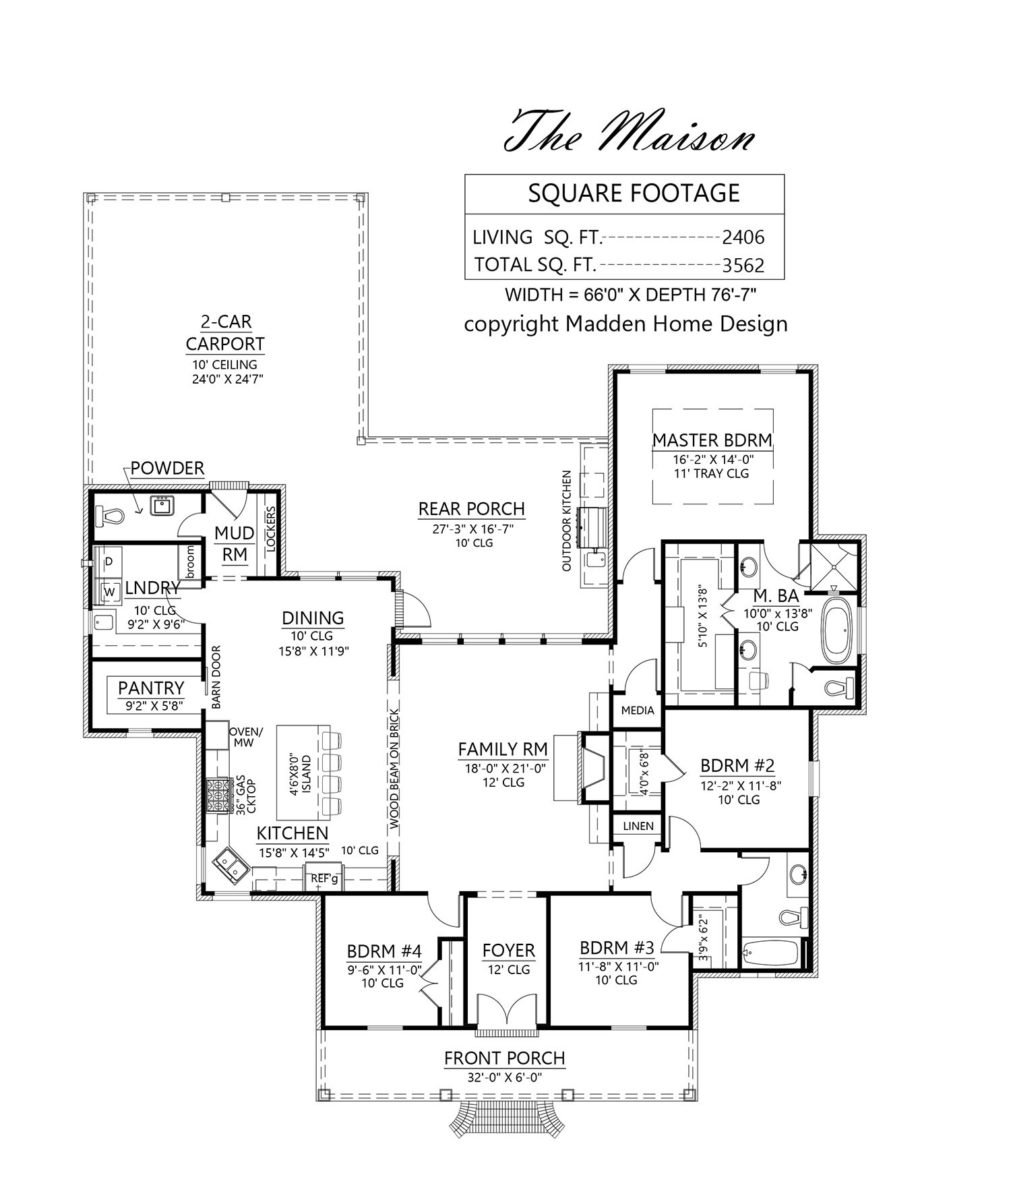 Get the perfect space for your family with The Maison.